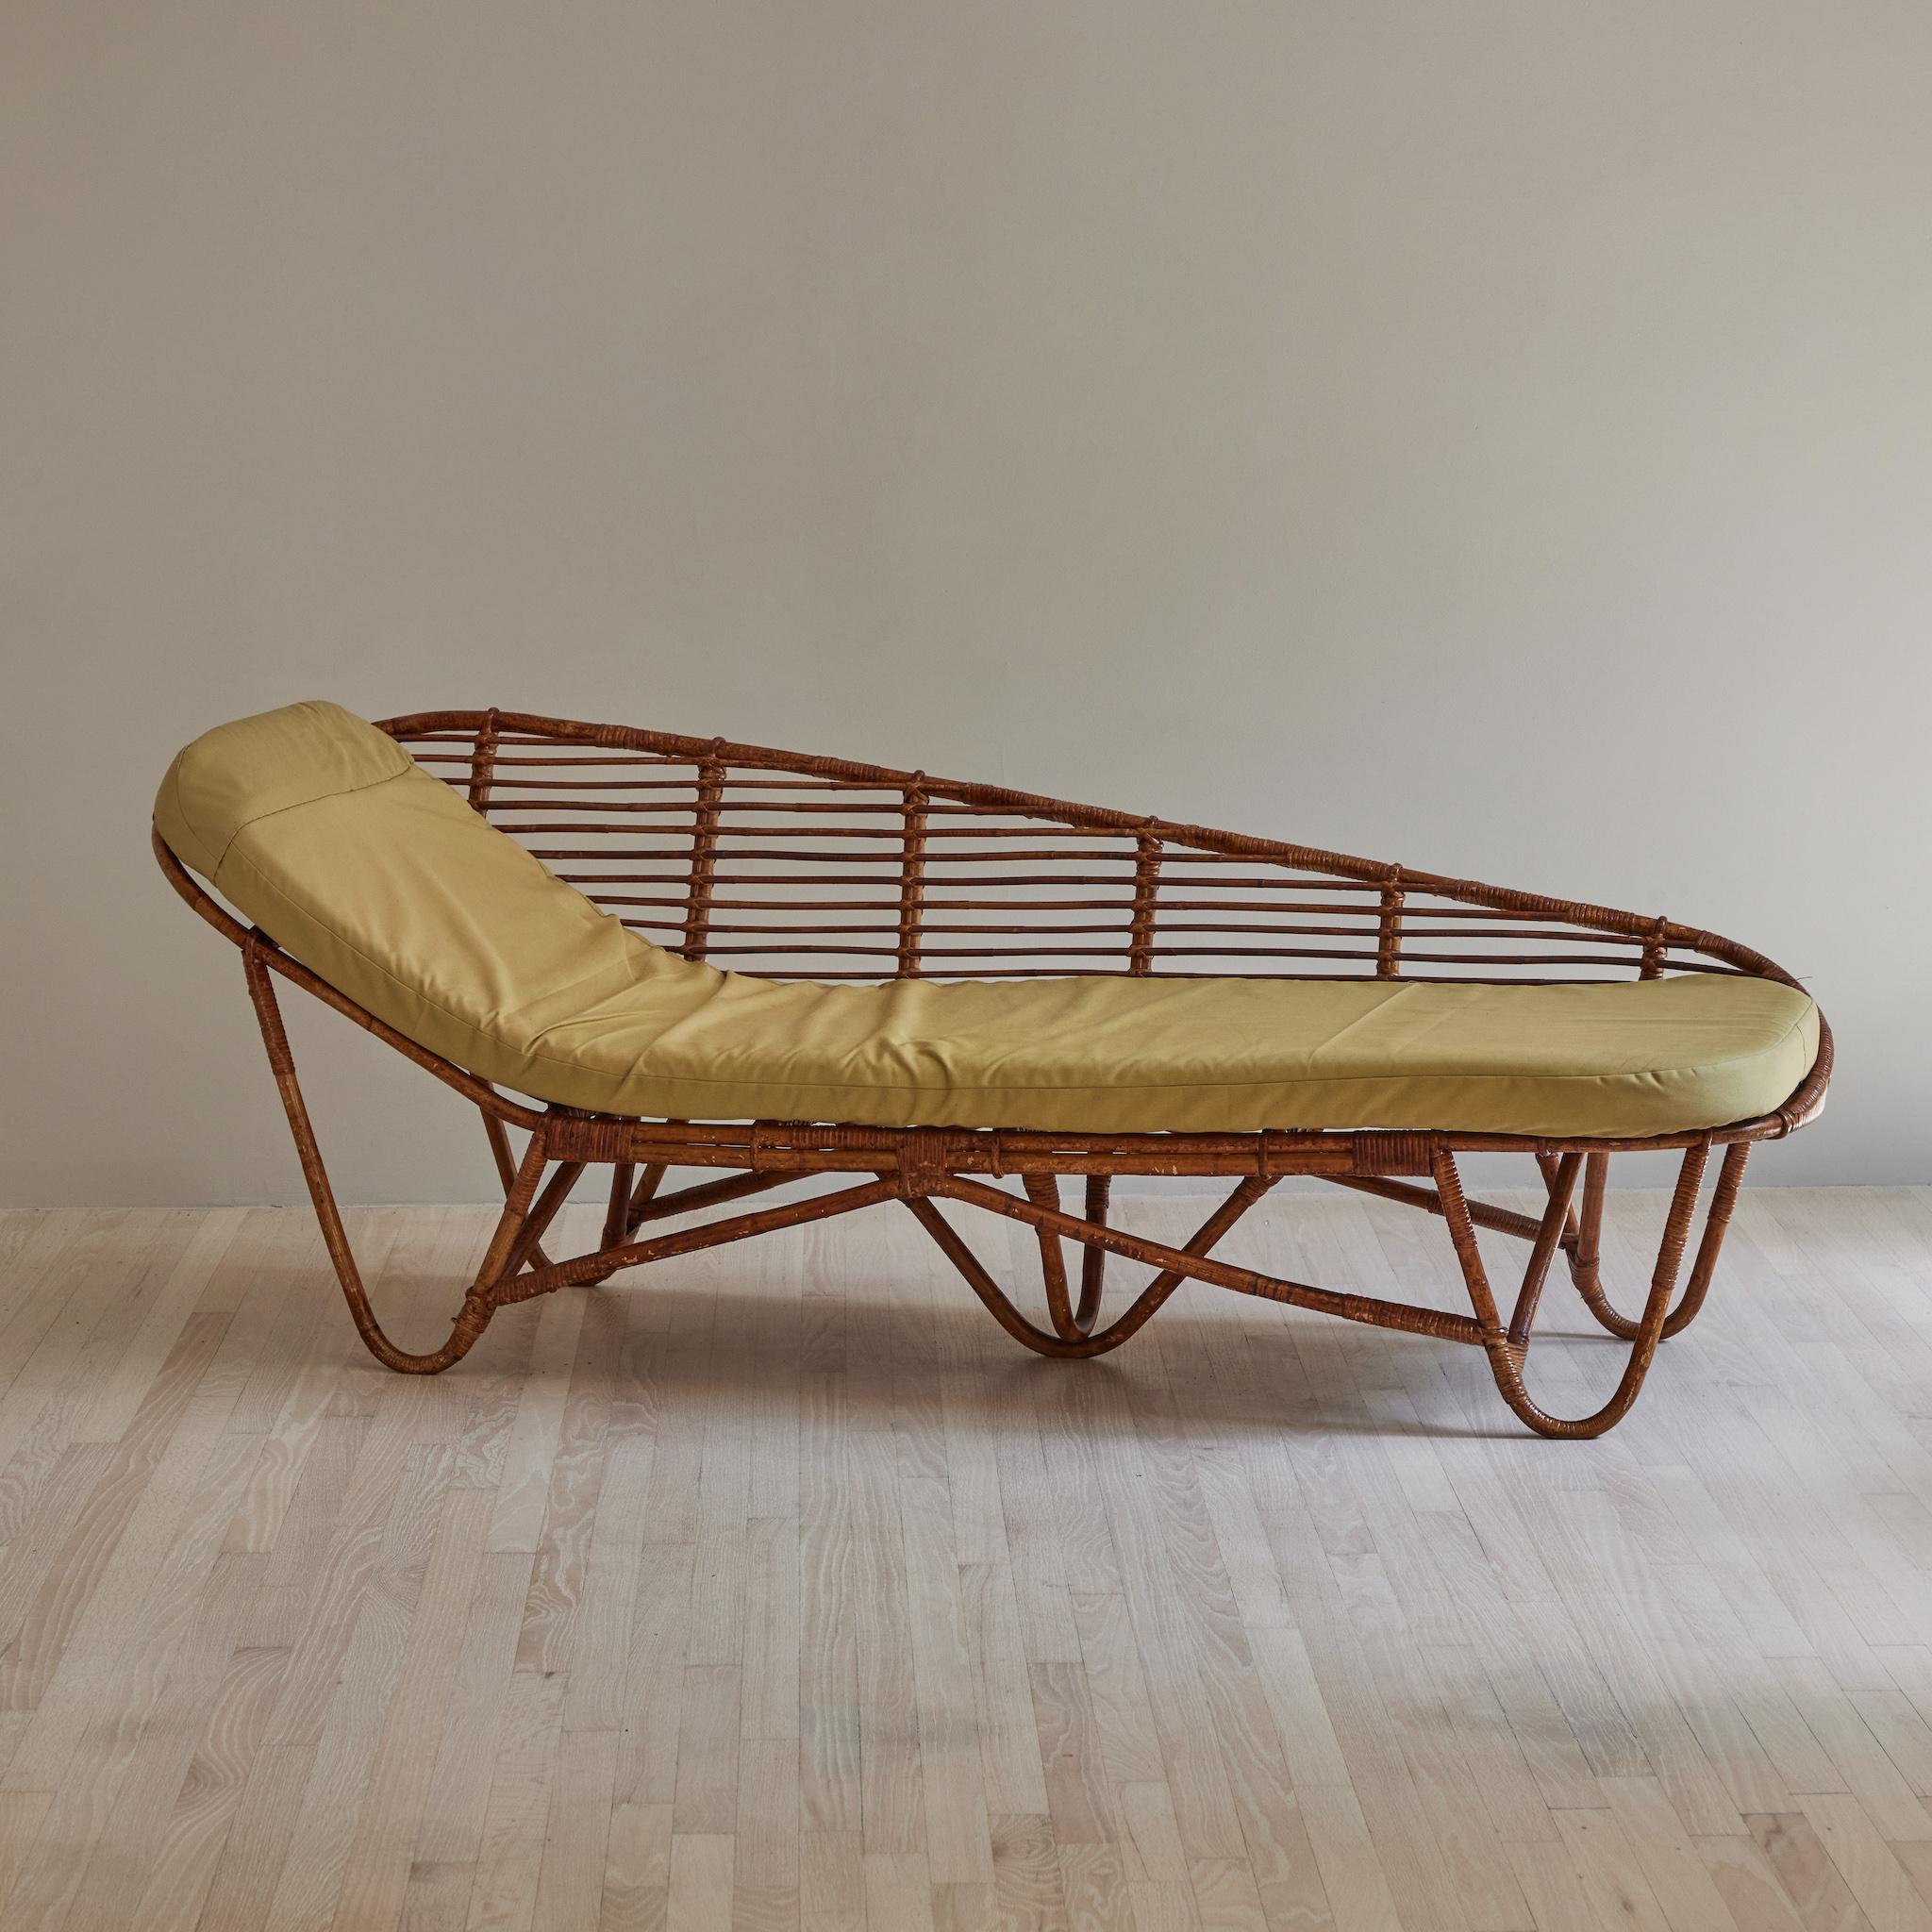 French mid-century rattan daybed, chaise, or loveseat. Warm and relaxed, this piece invites you to kick-back. The simple repetition of lines and soft curves gives this mid-century piece its natural sex appeal.
